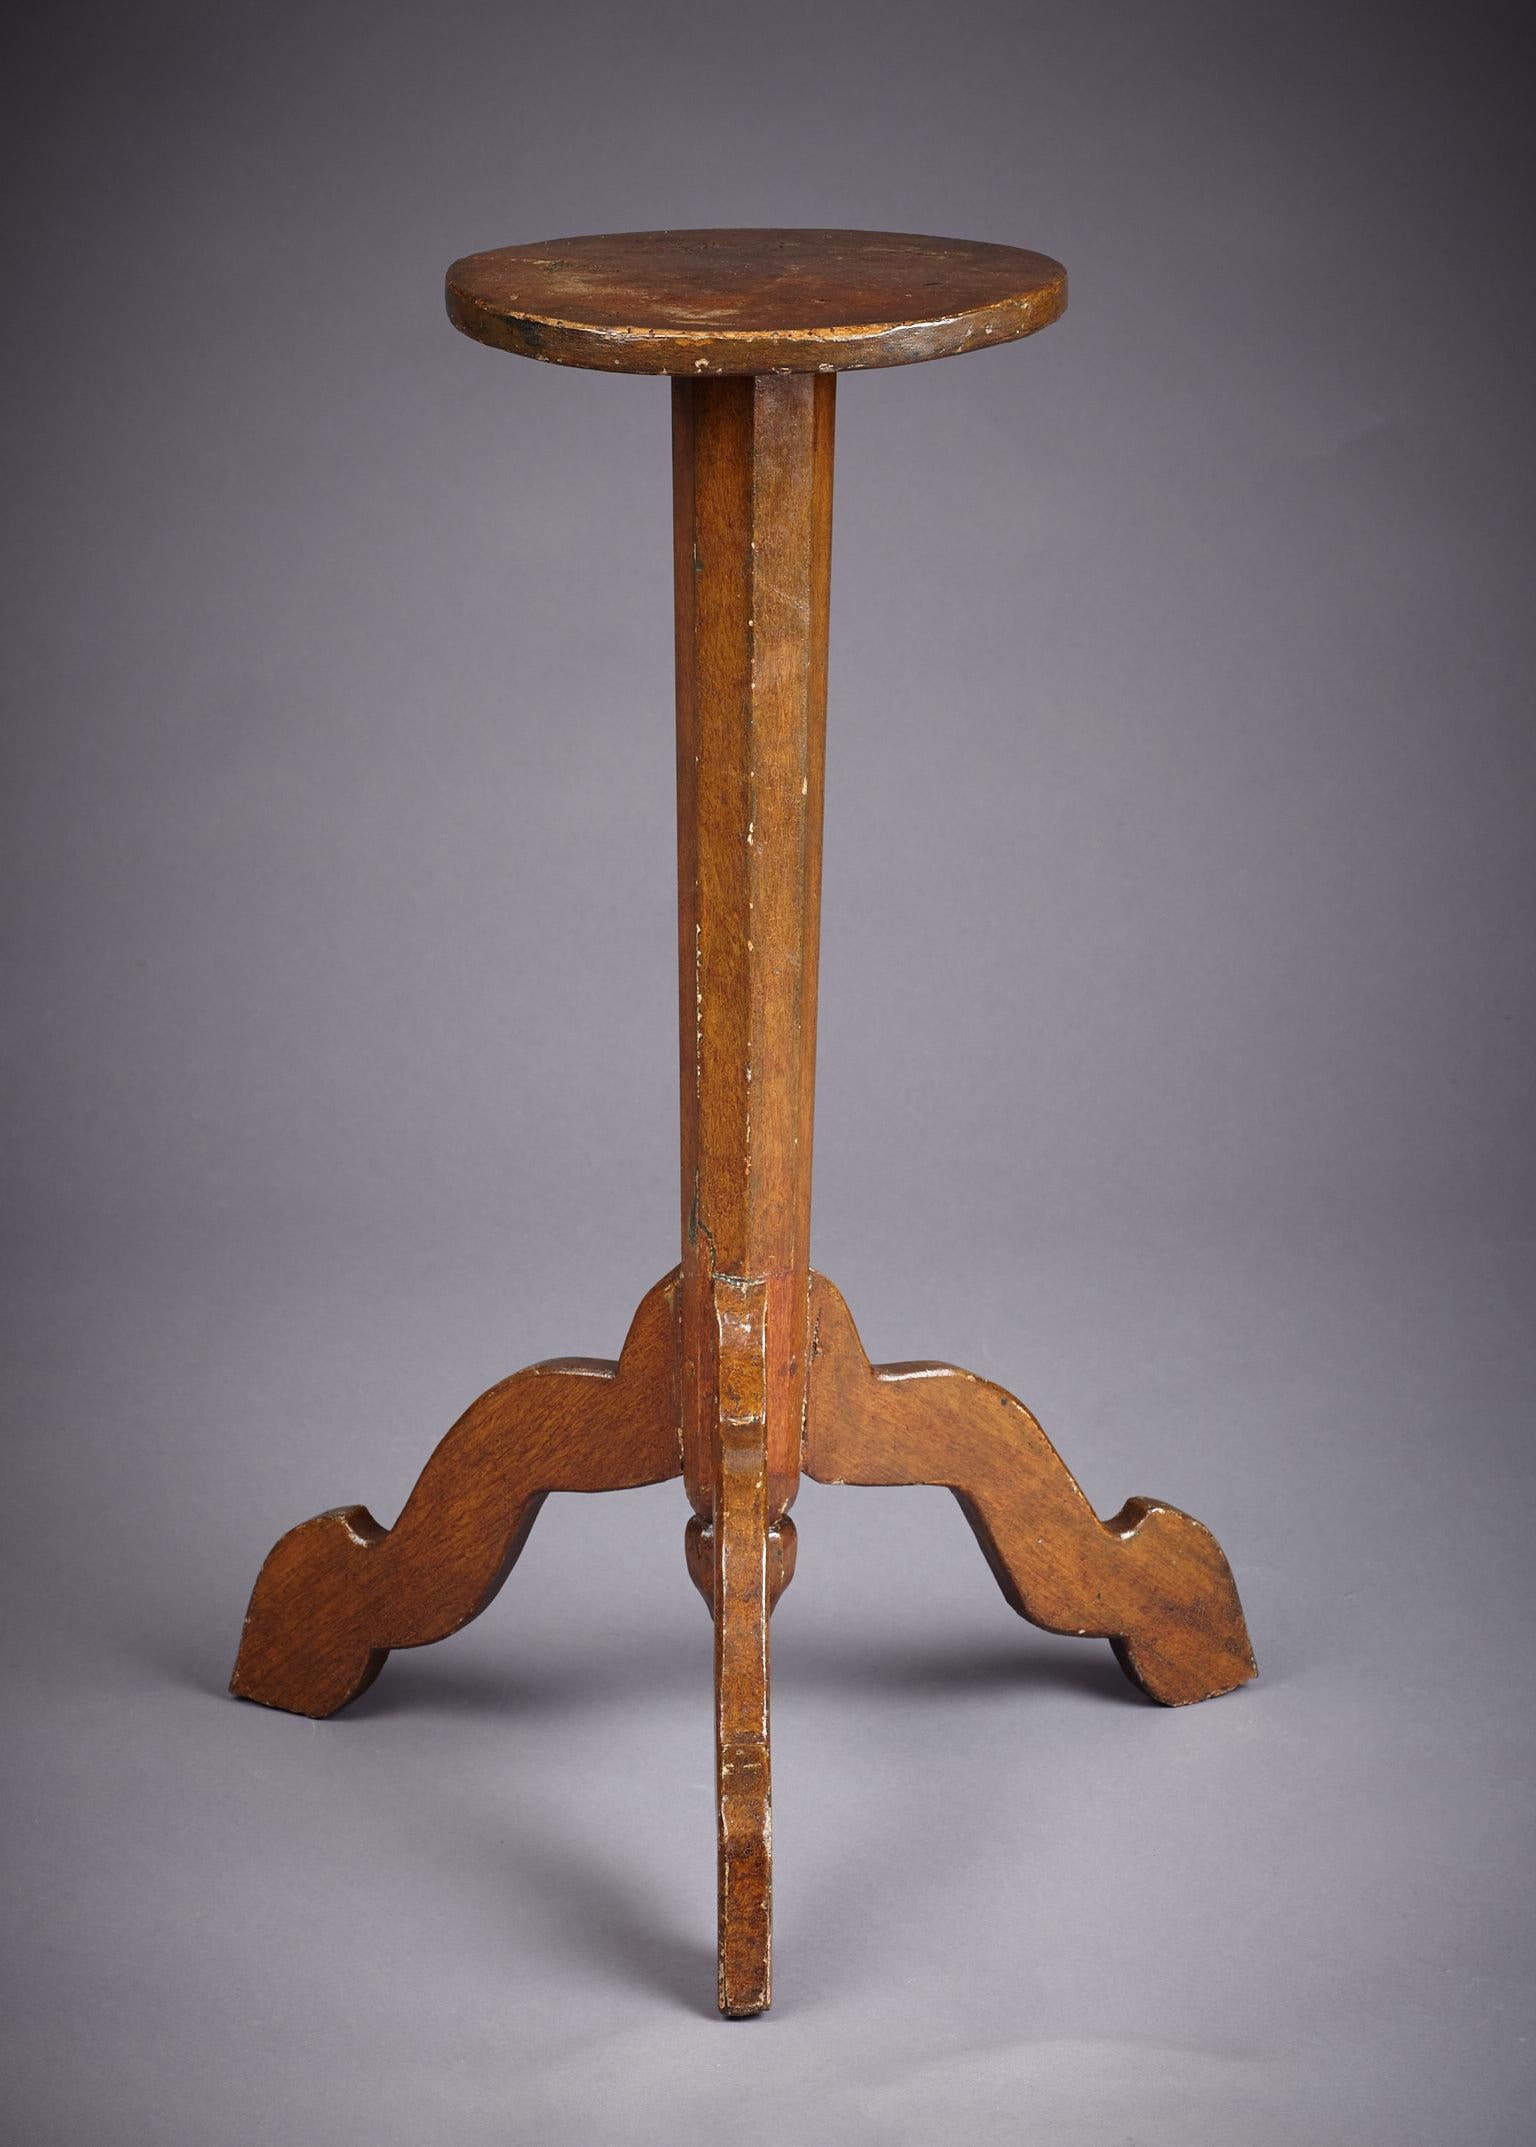 Painted Oak Candle-Stand, Early 18th Century, Queen Anne, England, circa 1710 (Tischlerei) im Angebot